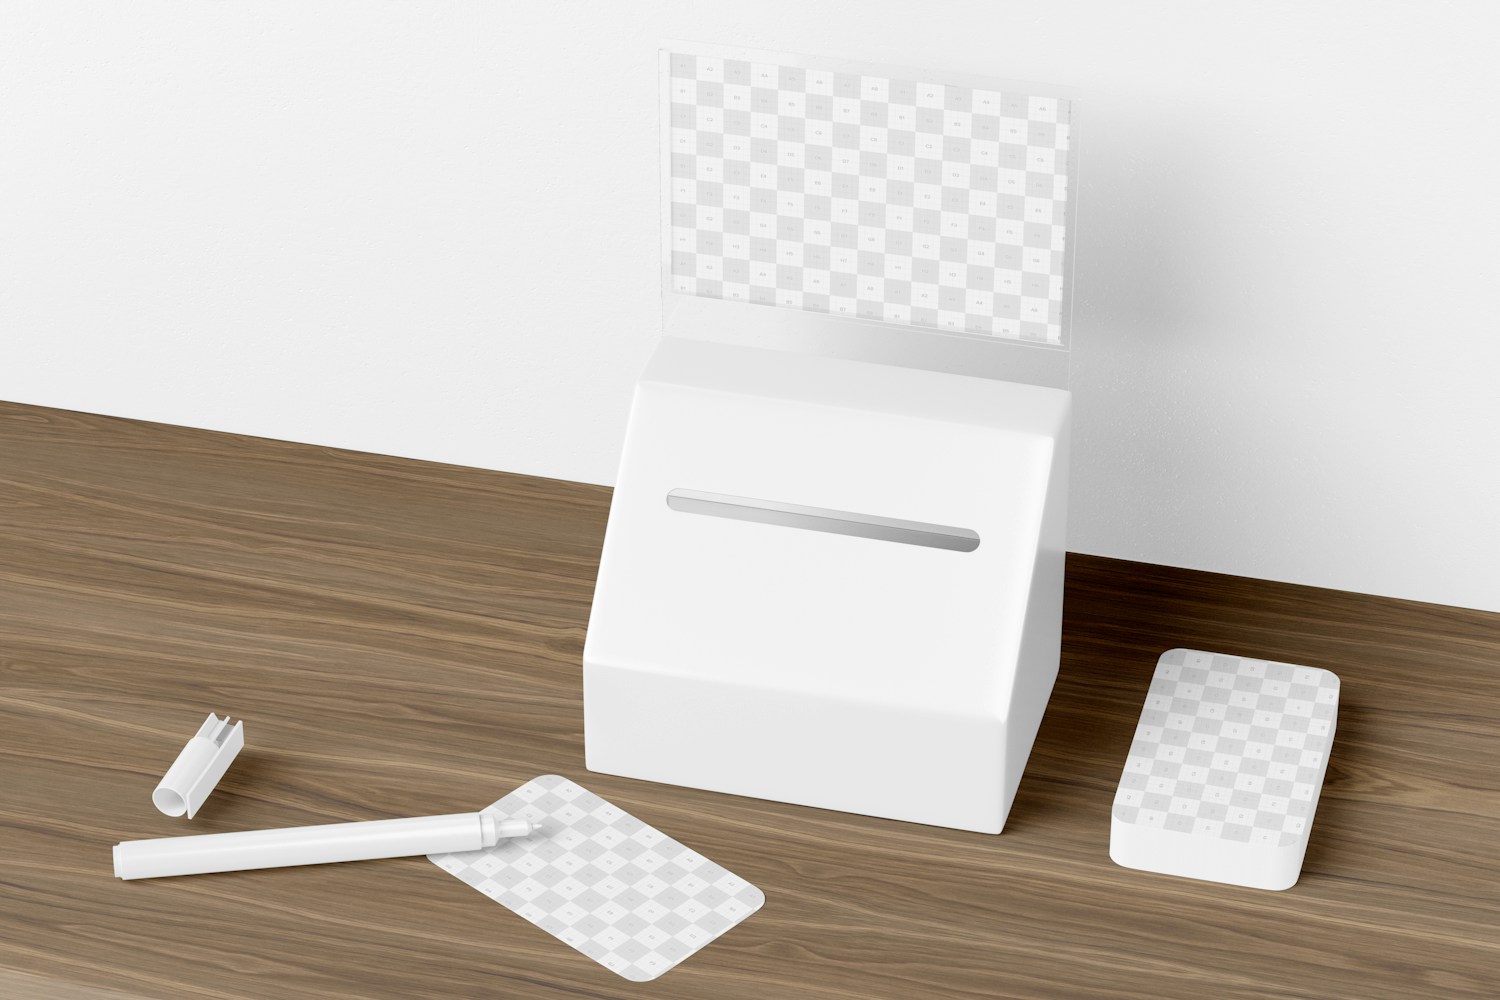 Suggestion Box With Poster Holder and Stationery Mockup